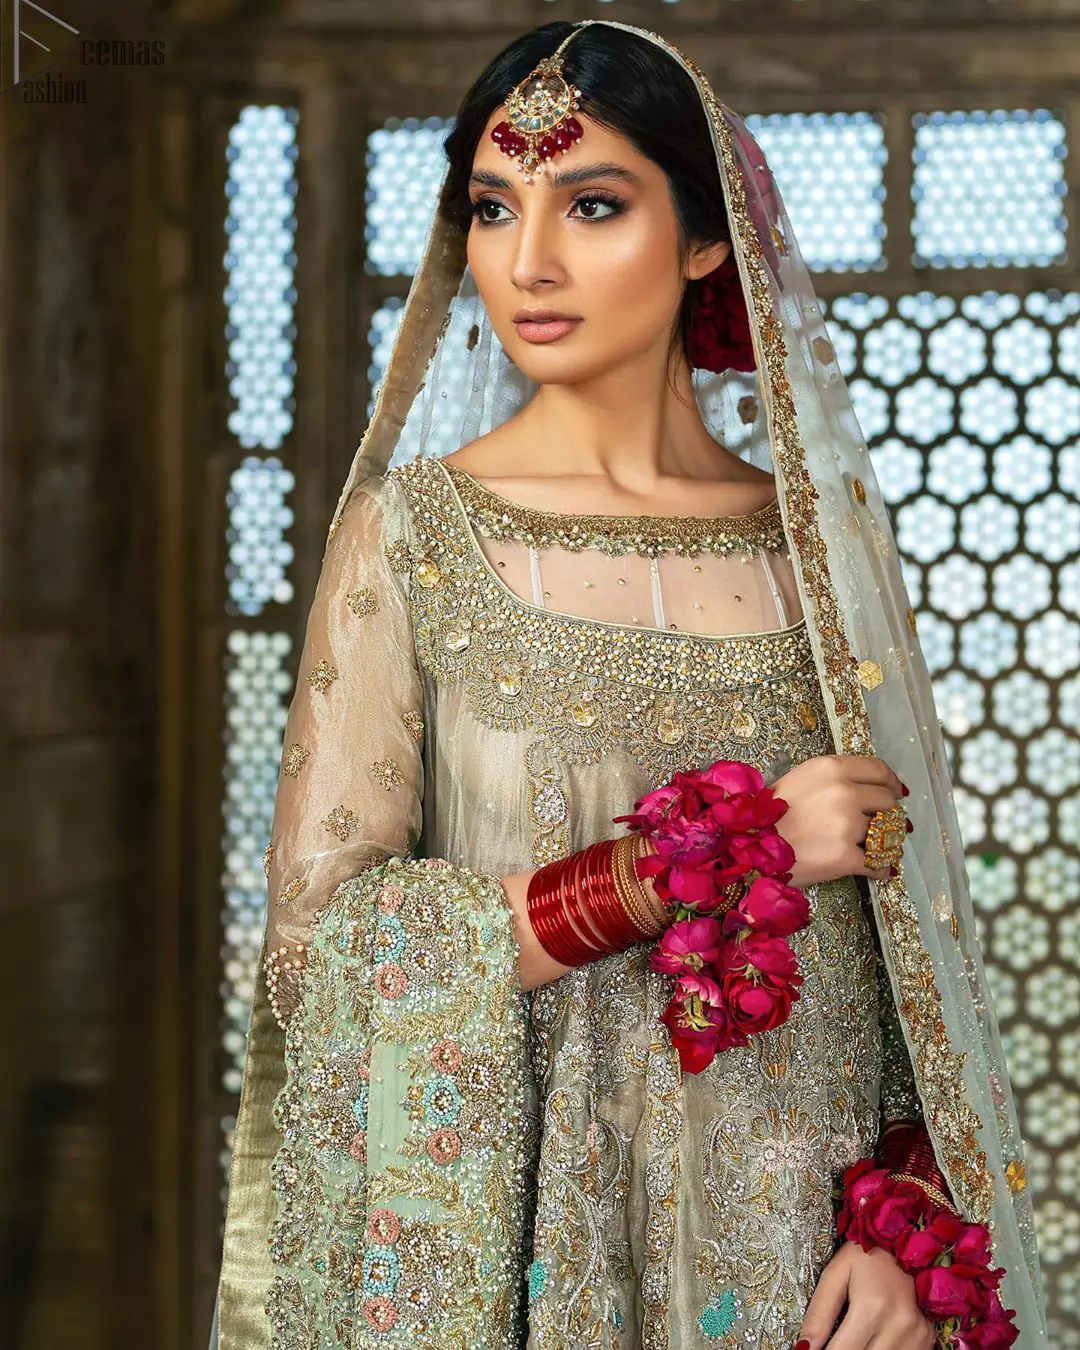 Pastel Green Double Layer Frock - Tea Rose Sharara. Fabulously stitched, Pastel Green double flared frock in maxi style is exquisite indeed. Fully embellished with tilla, dabka, sequins, pearls and silk thread embroidery. The frock body is entirely composed of pure organza with one part round neckline. Frock comes with three-quarter sleeves and it is concealed with a side zip closure. Tea rose pure tissue sharara with decently composed with fixed waist belt with side zip closure is one to wear on nikah or on a wedding day.